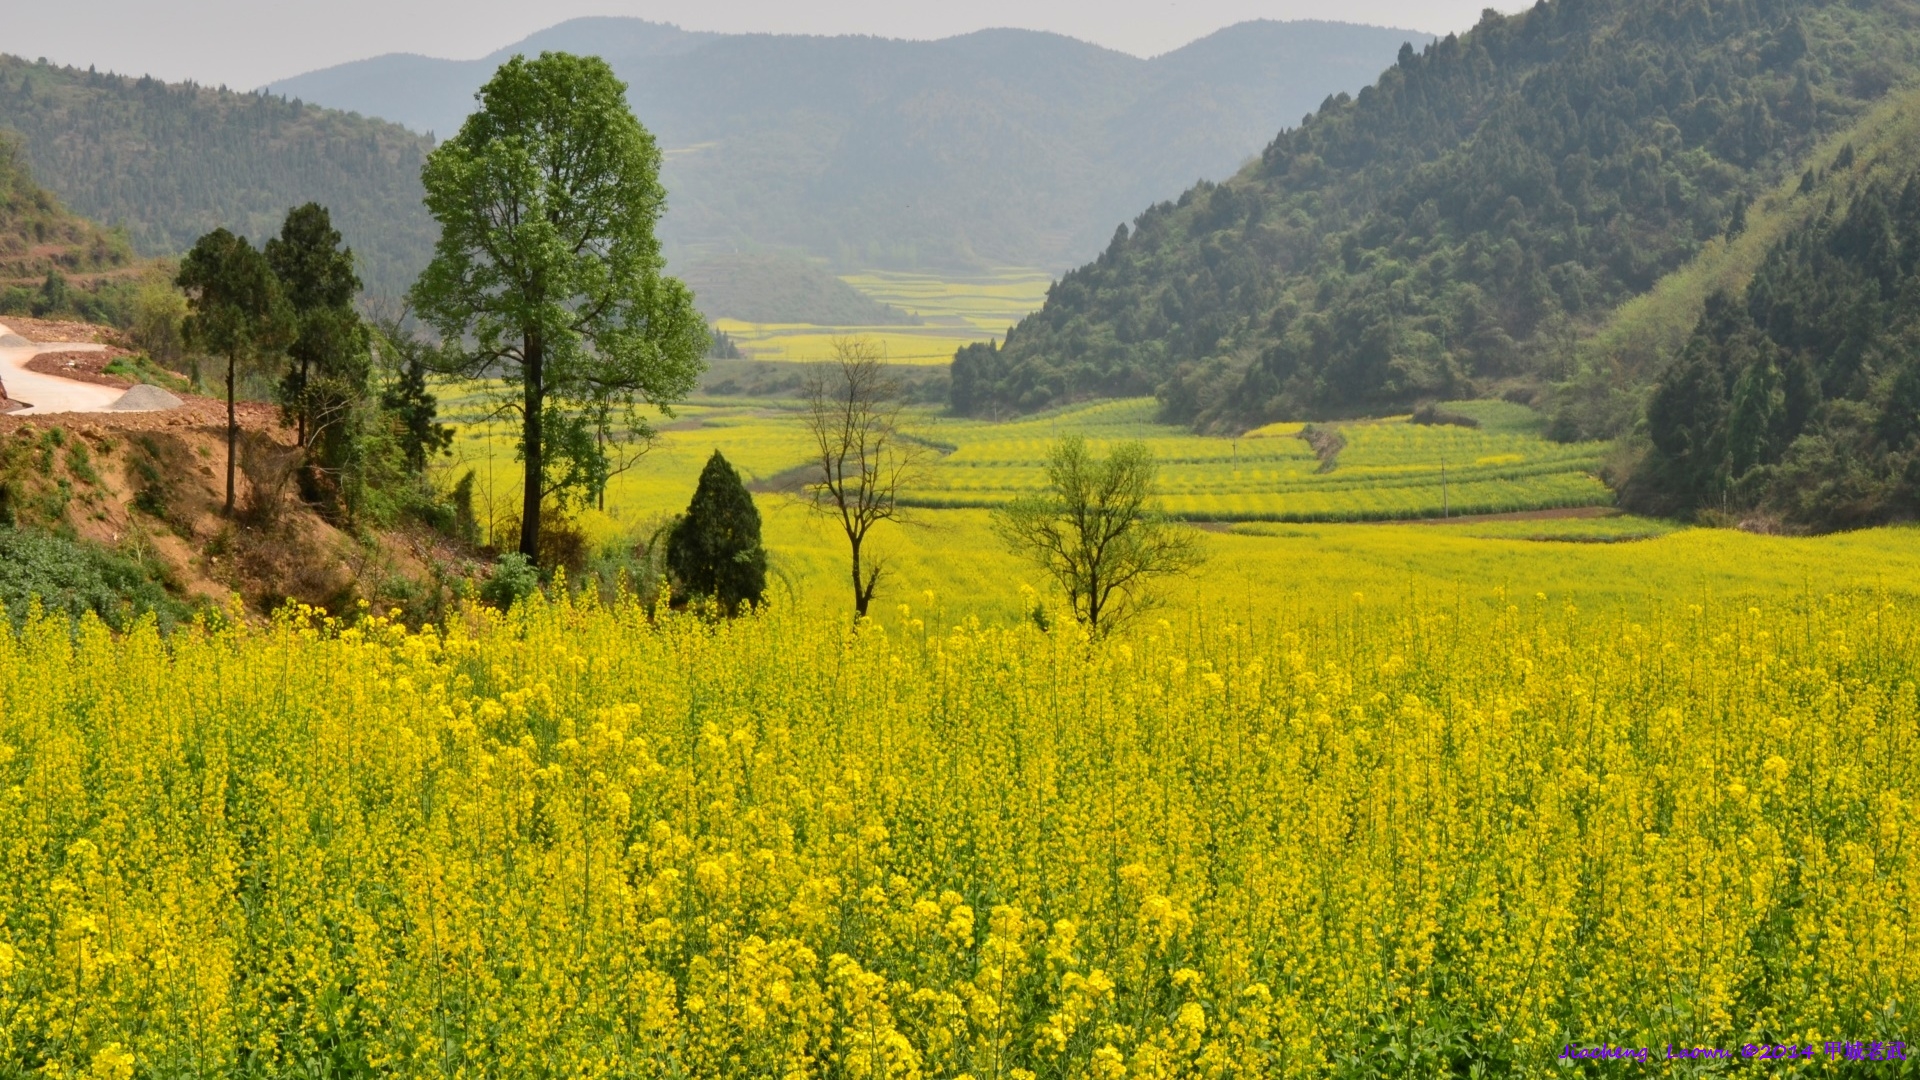 Canola flowers from Laowu's old home at Lifeng